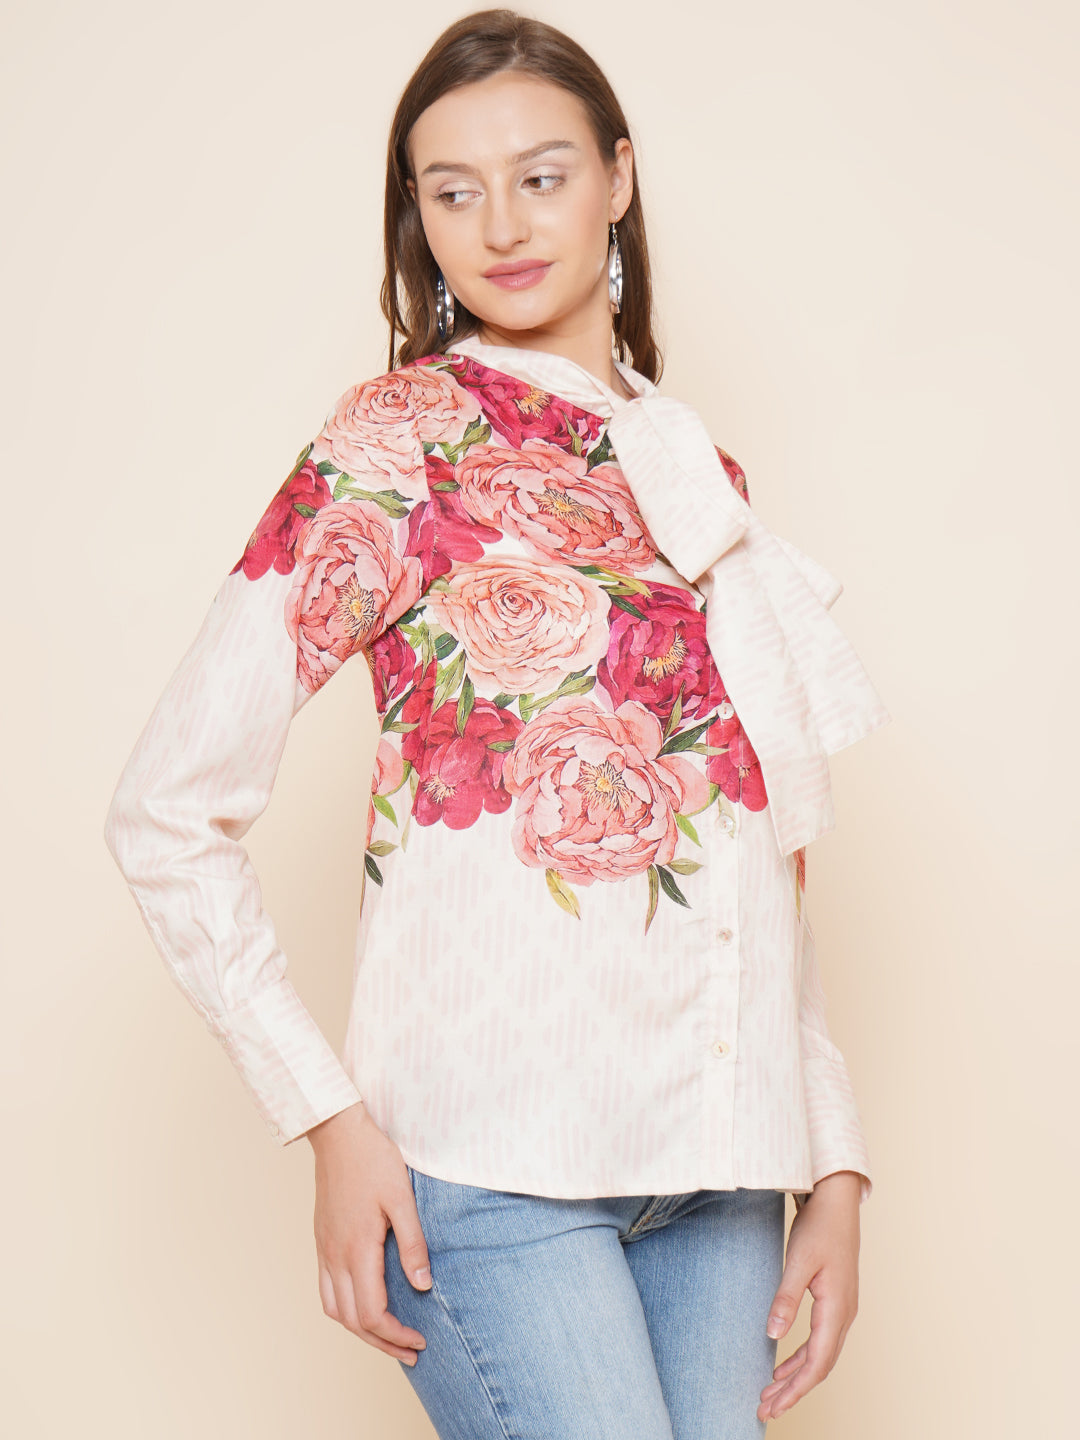 Bhama Couture Beige Floral Printed Shirt Style Top